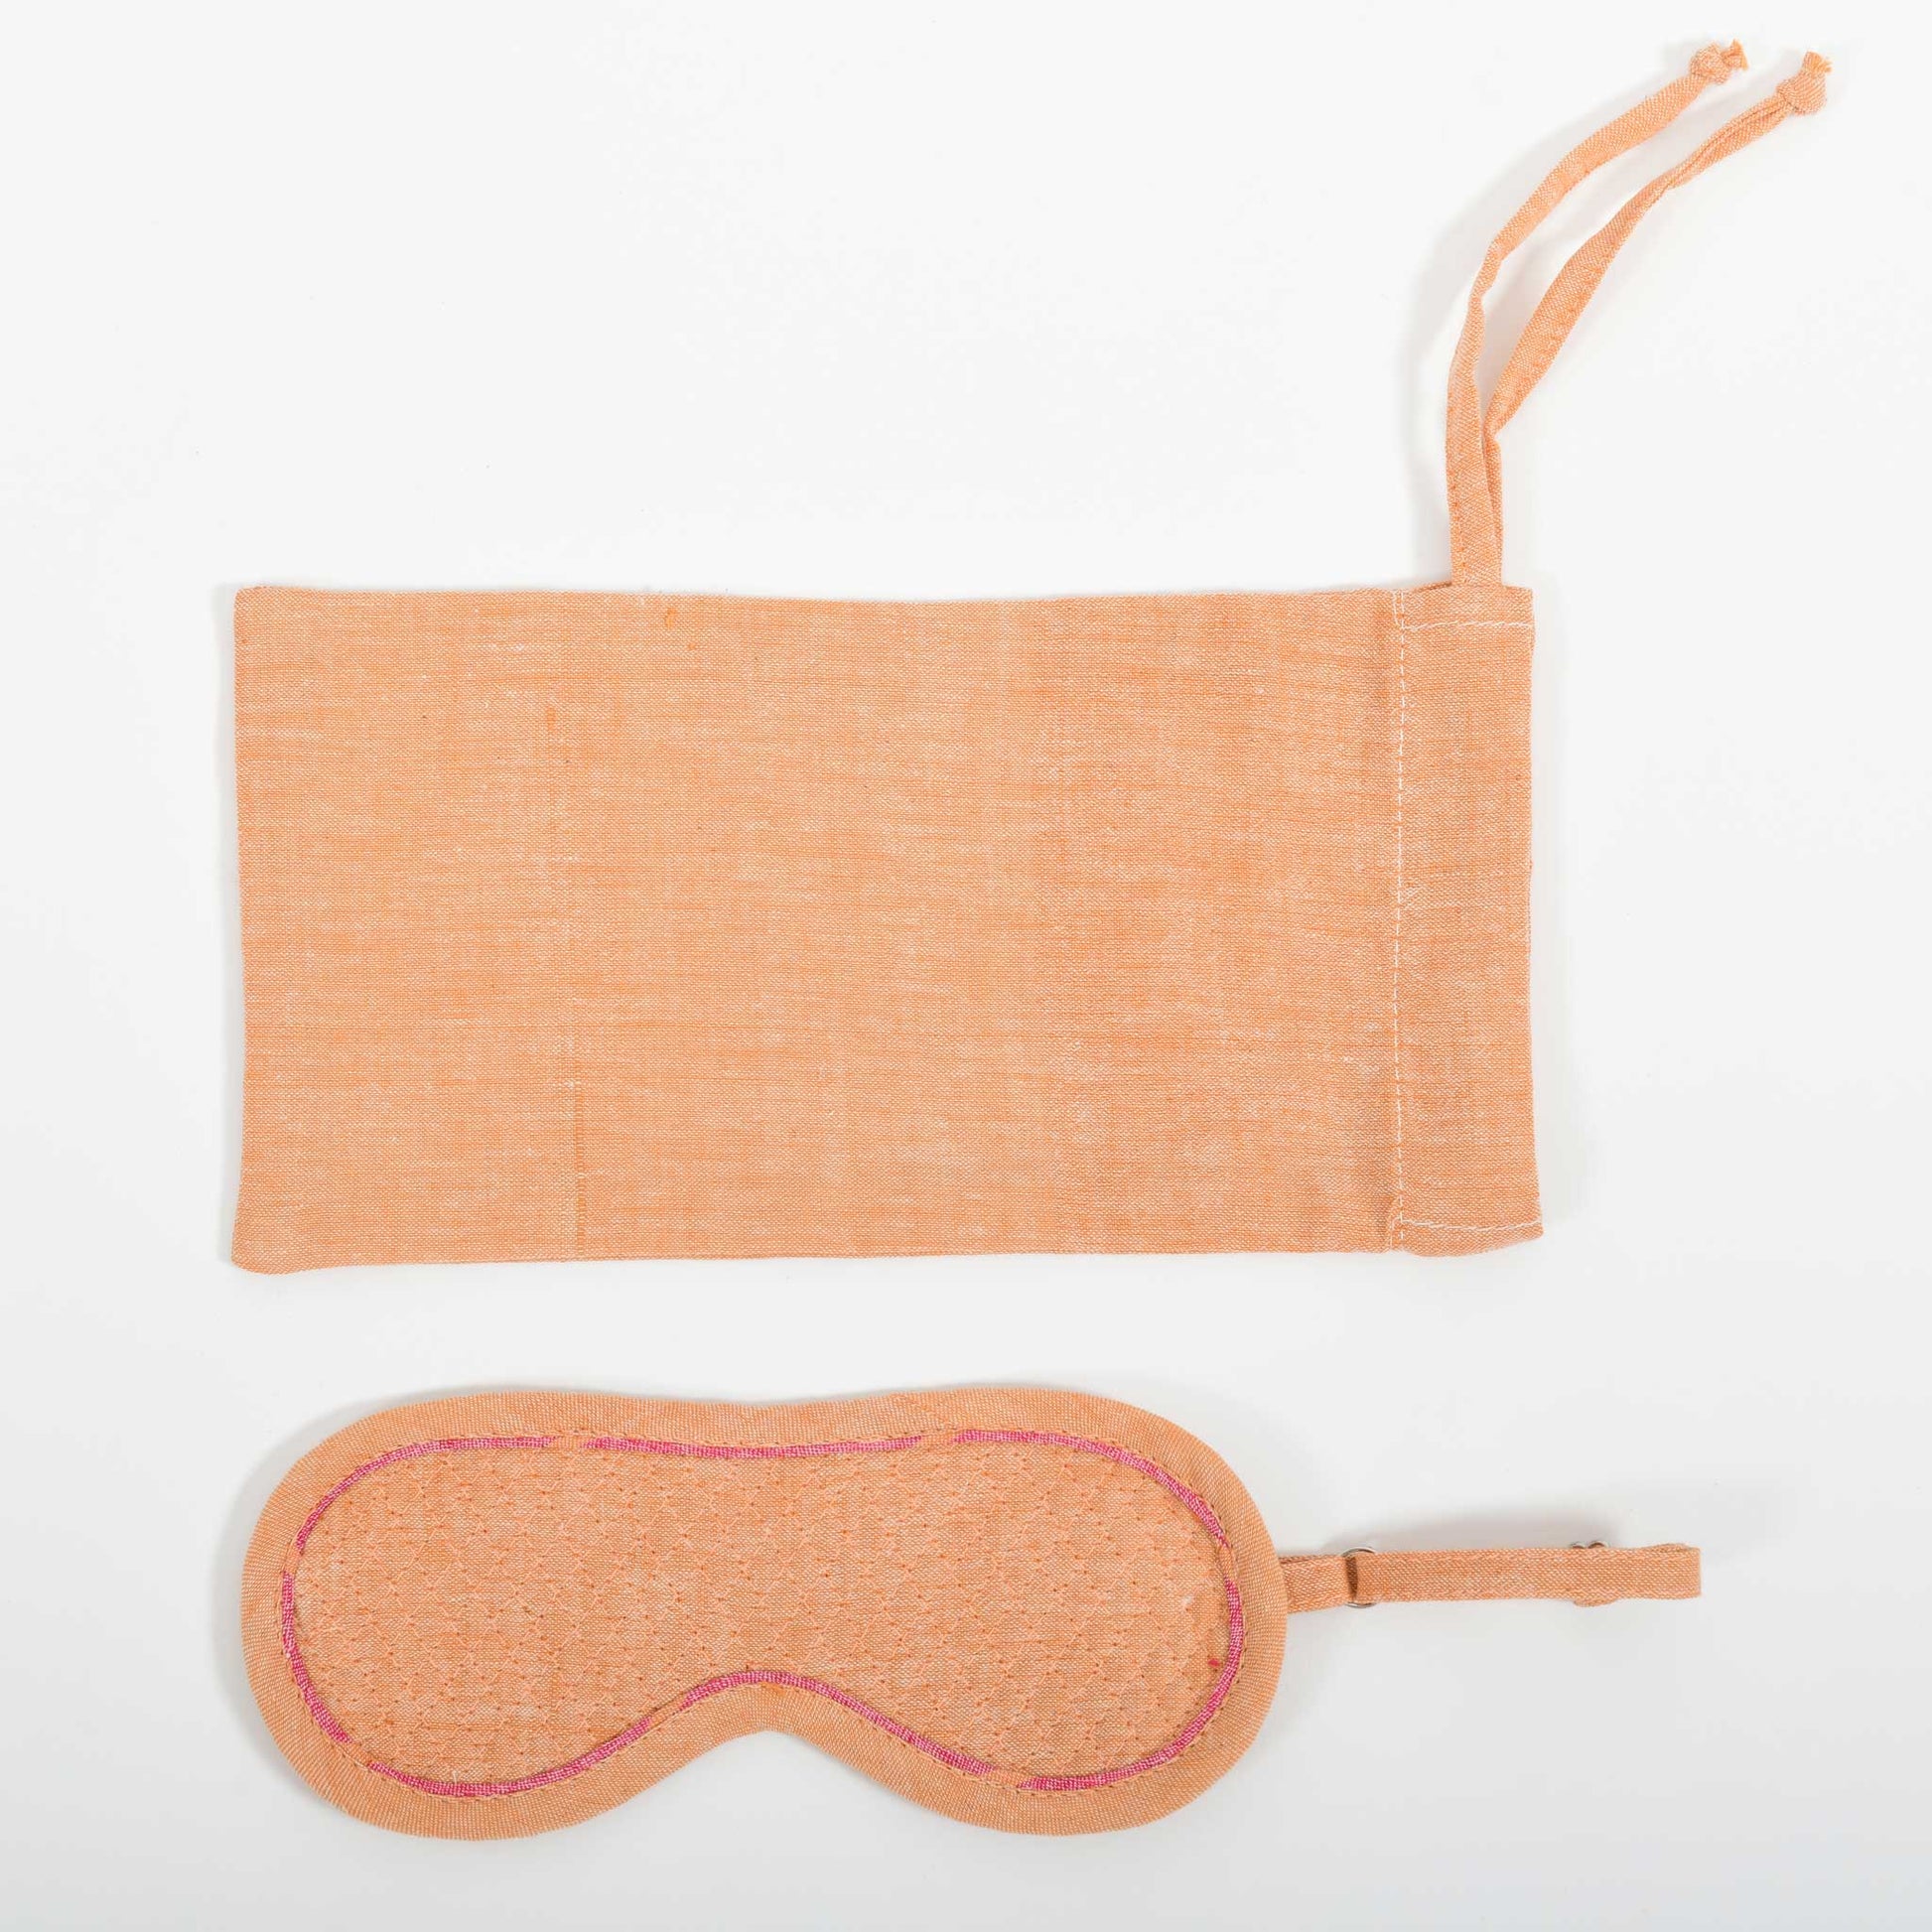 A close-up image from the top of the orange chambray eye mask and it's co-ordinated cover made in handspun and handwoven khadi cotton by Cotton Rack.